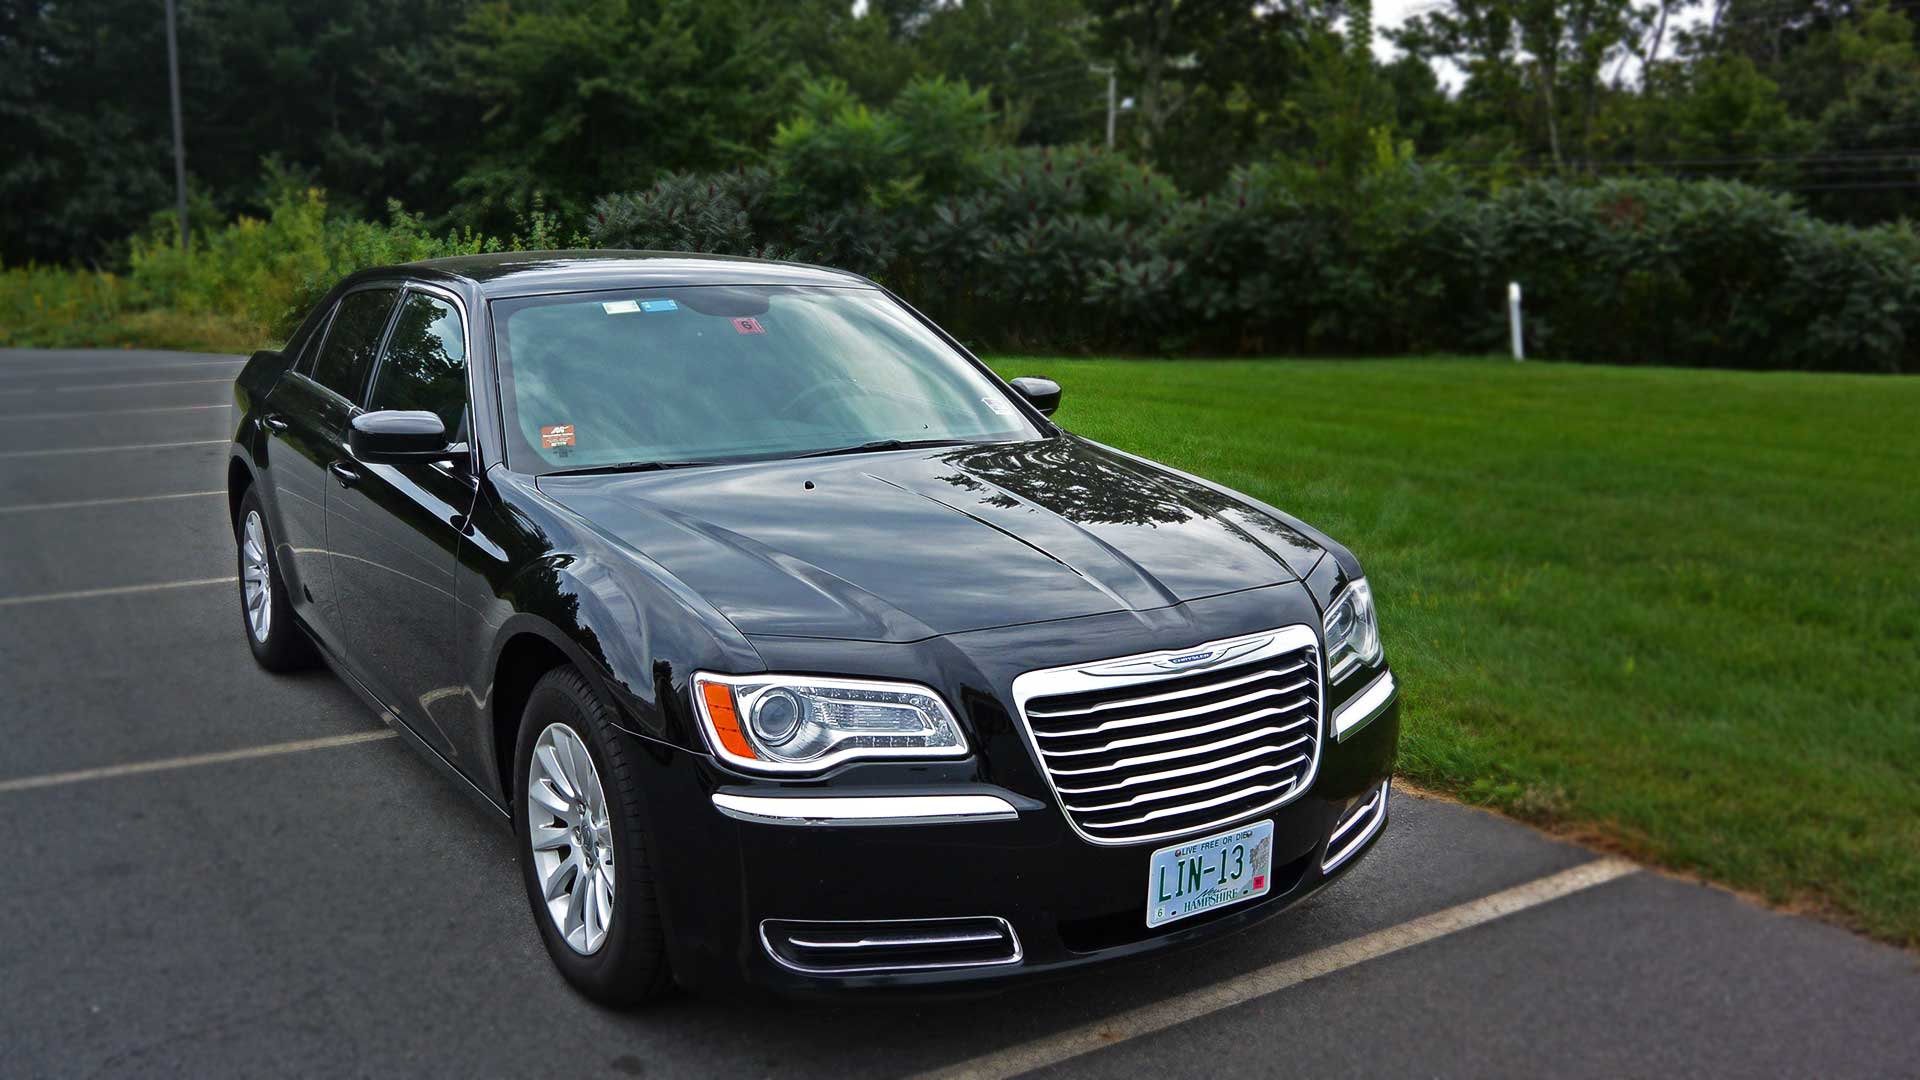 Linahan Limousine Limo Service In Nh Ma Chrysler 300c Wallpaper